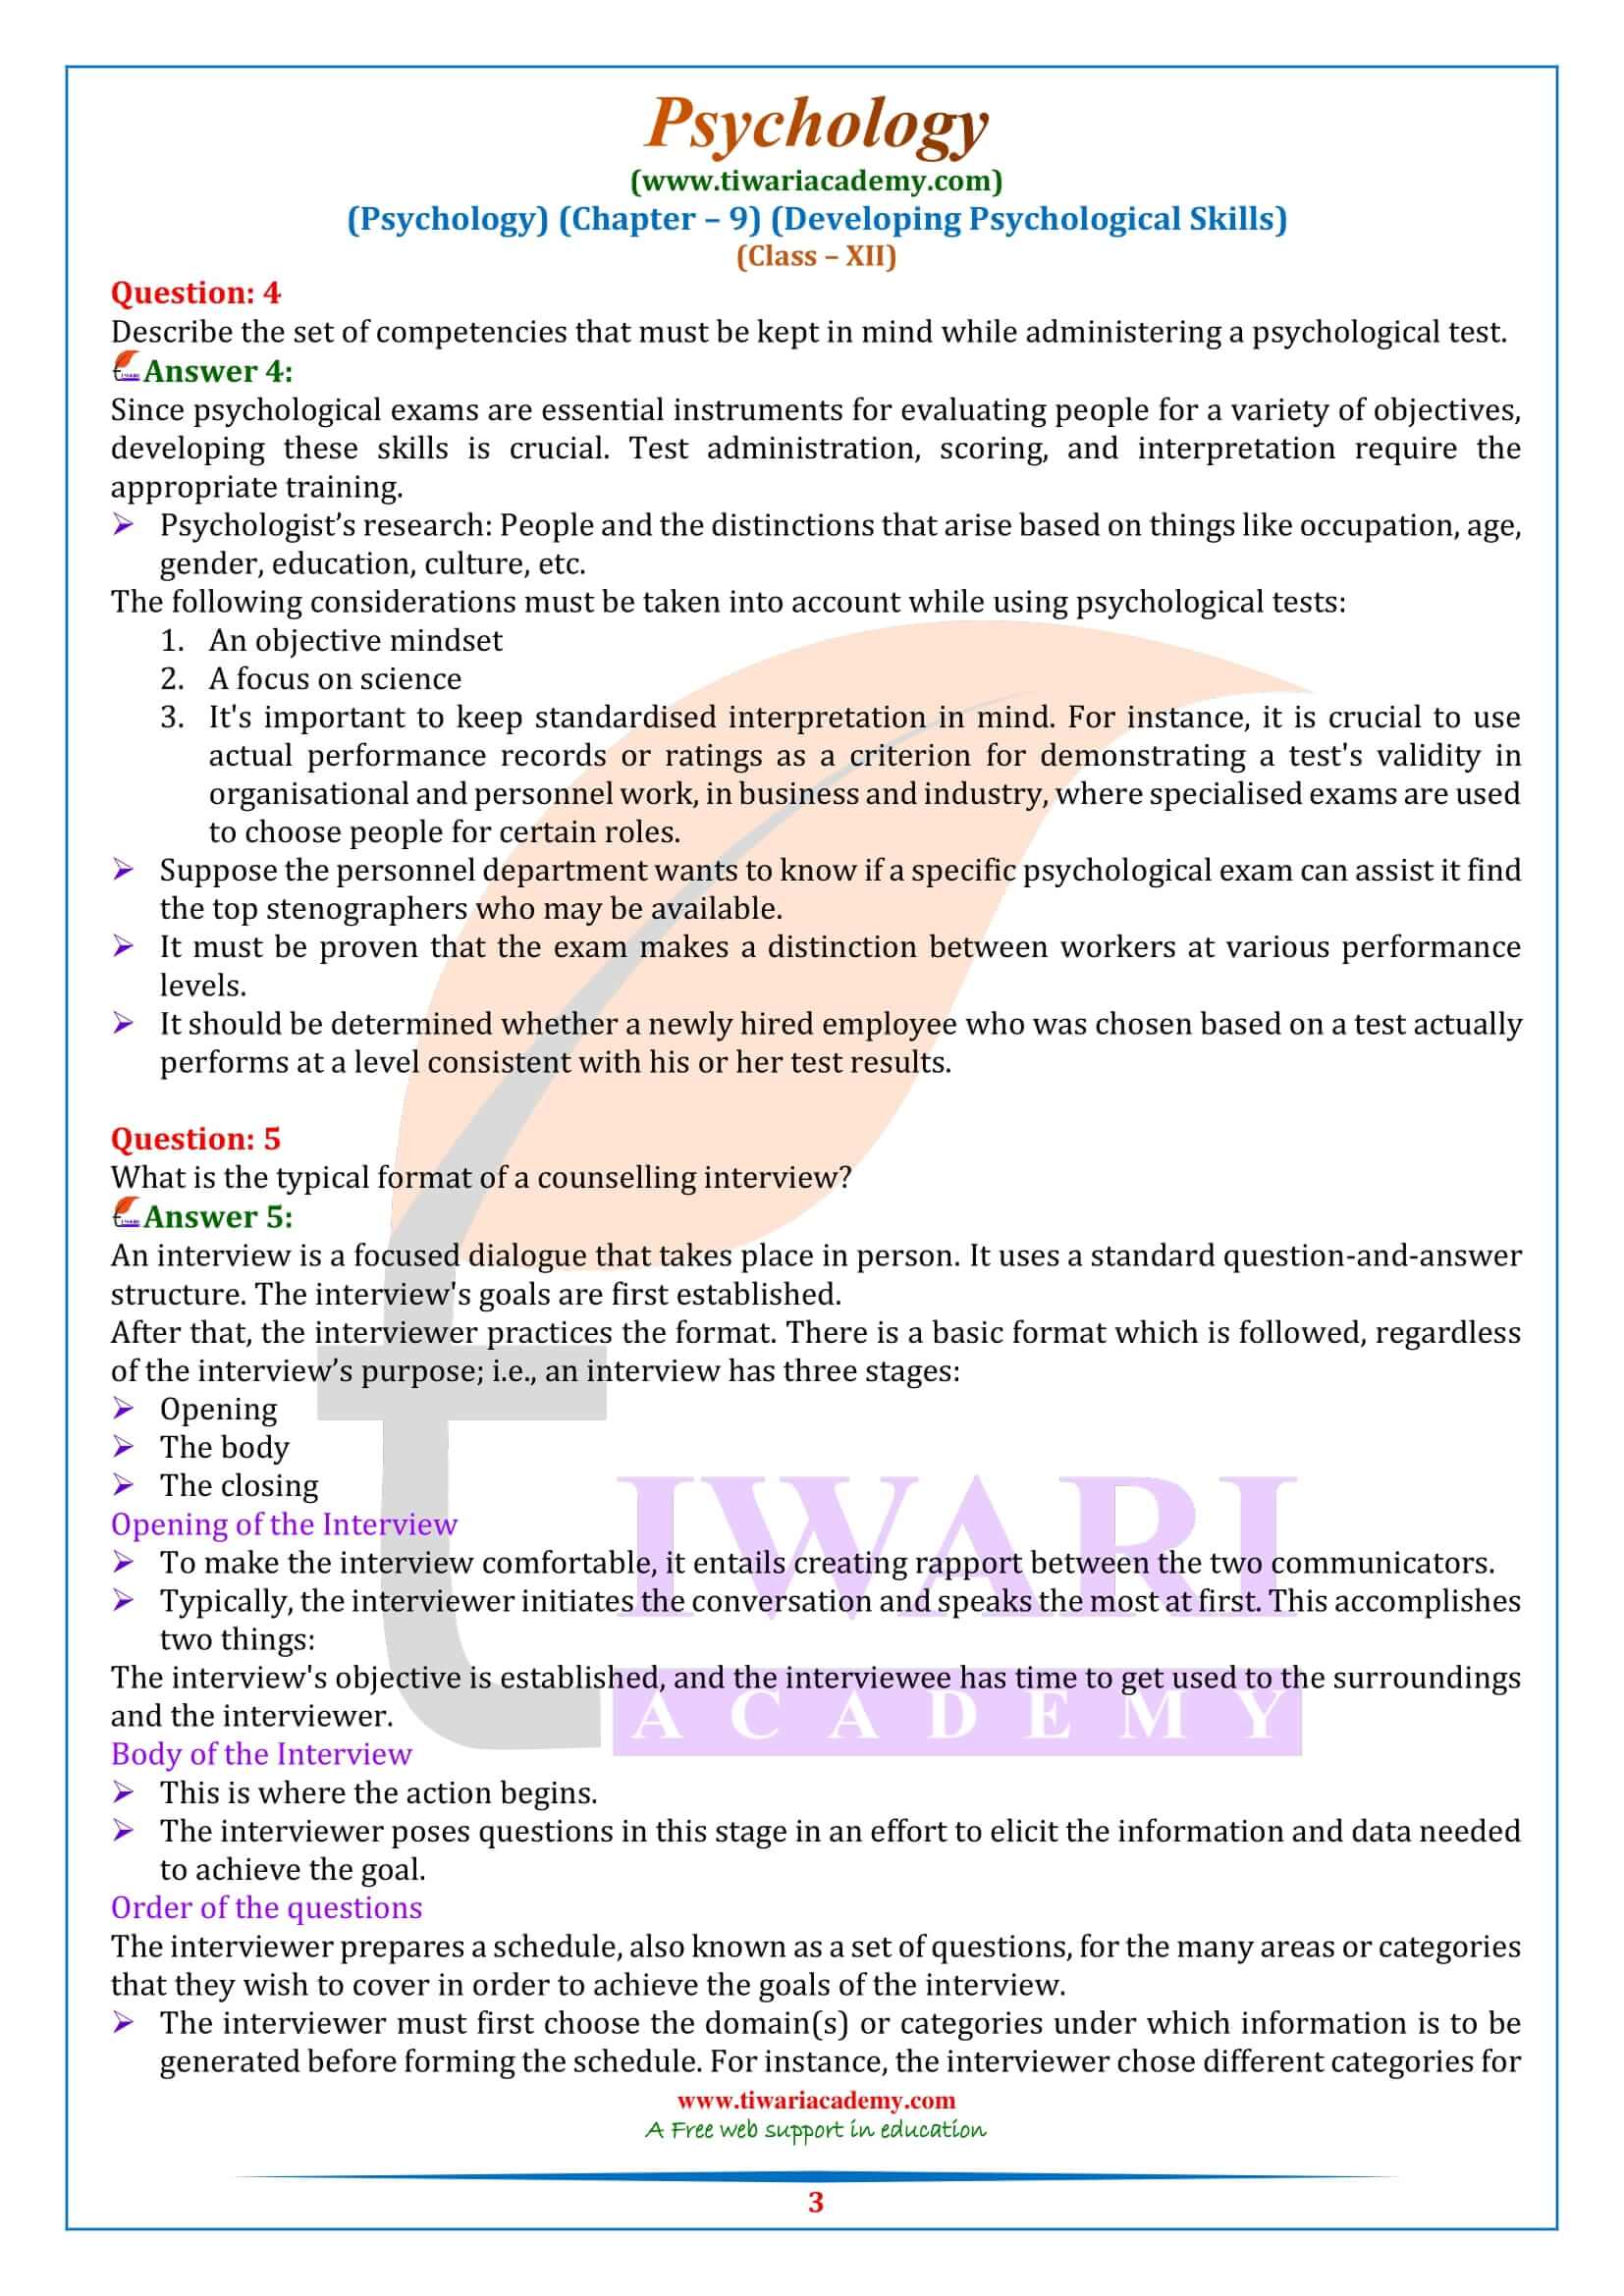 NCERT Solutions for Class 12 Psychology Chapter 9 in English Medium